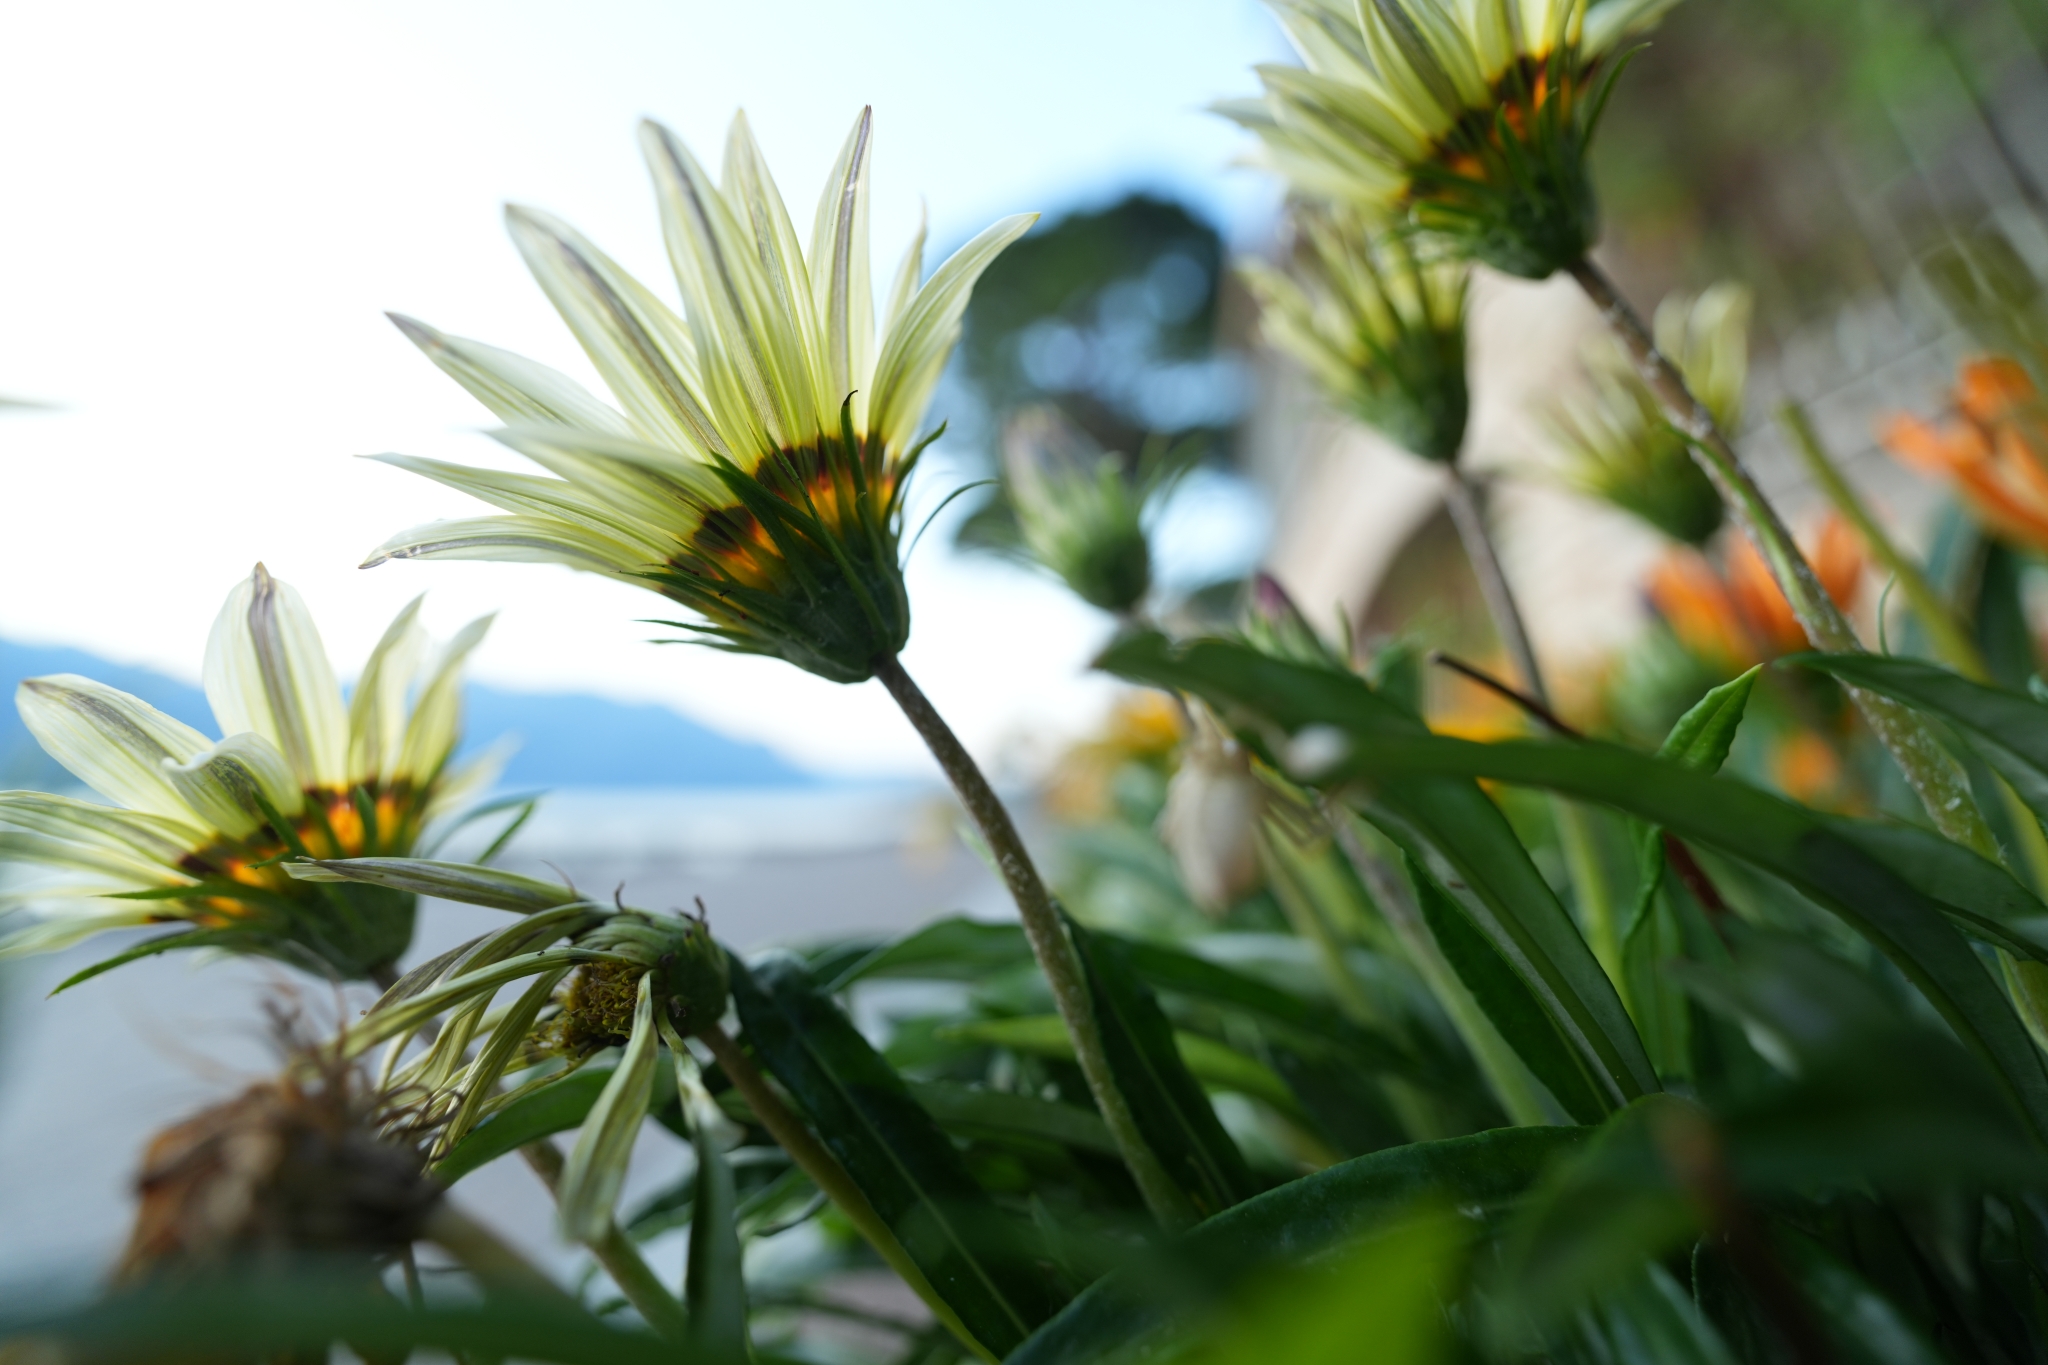 Flowers growing towards the sky with bokeh background